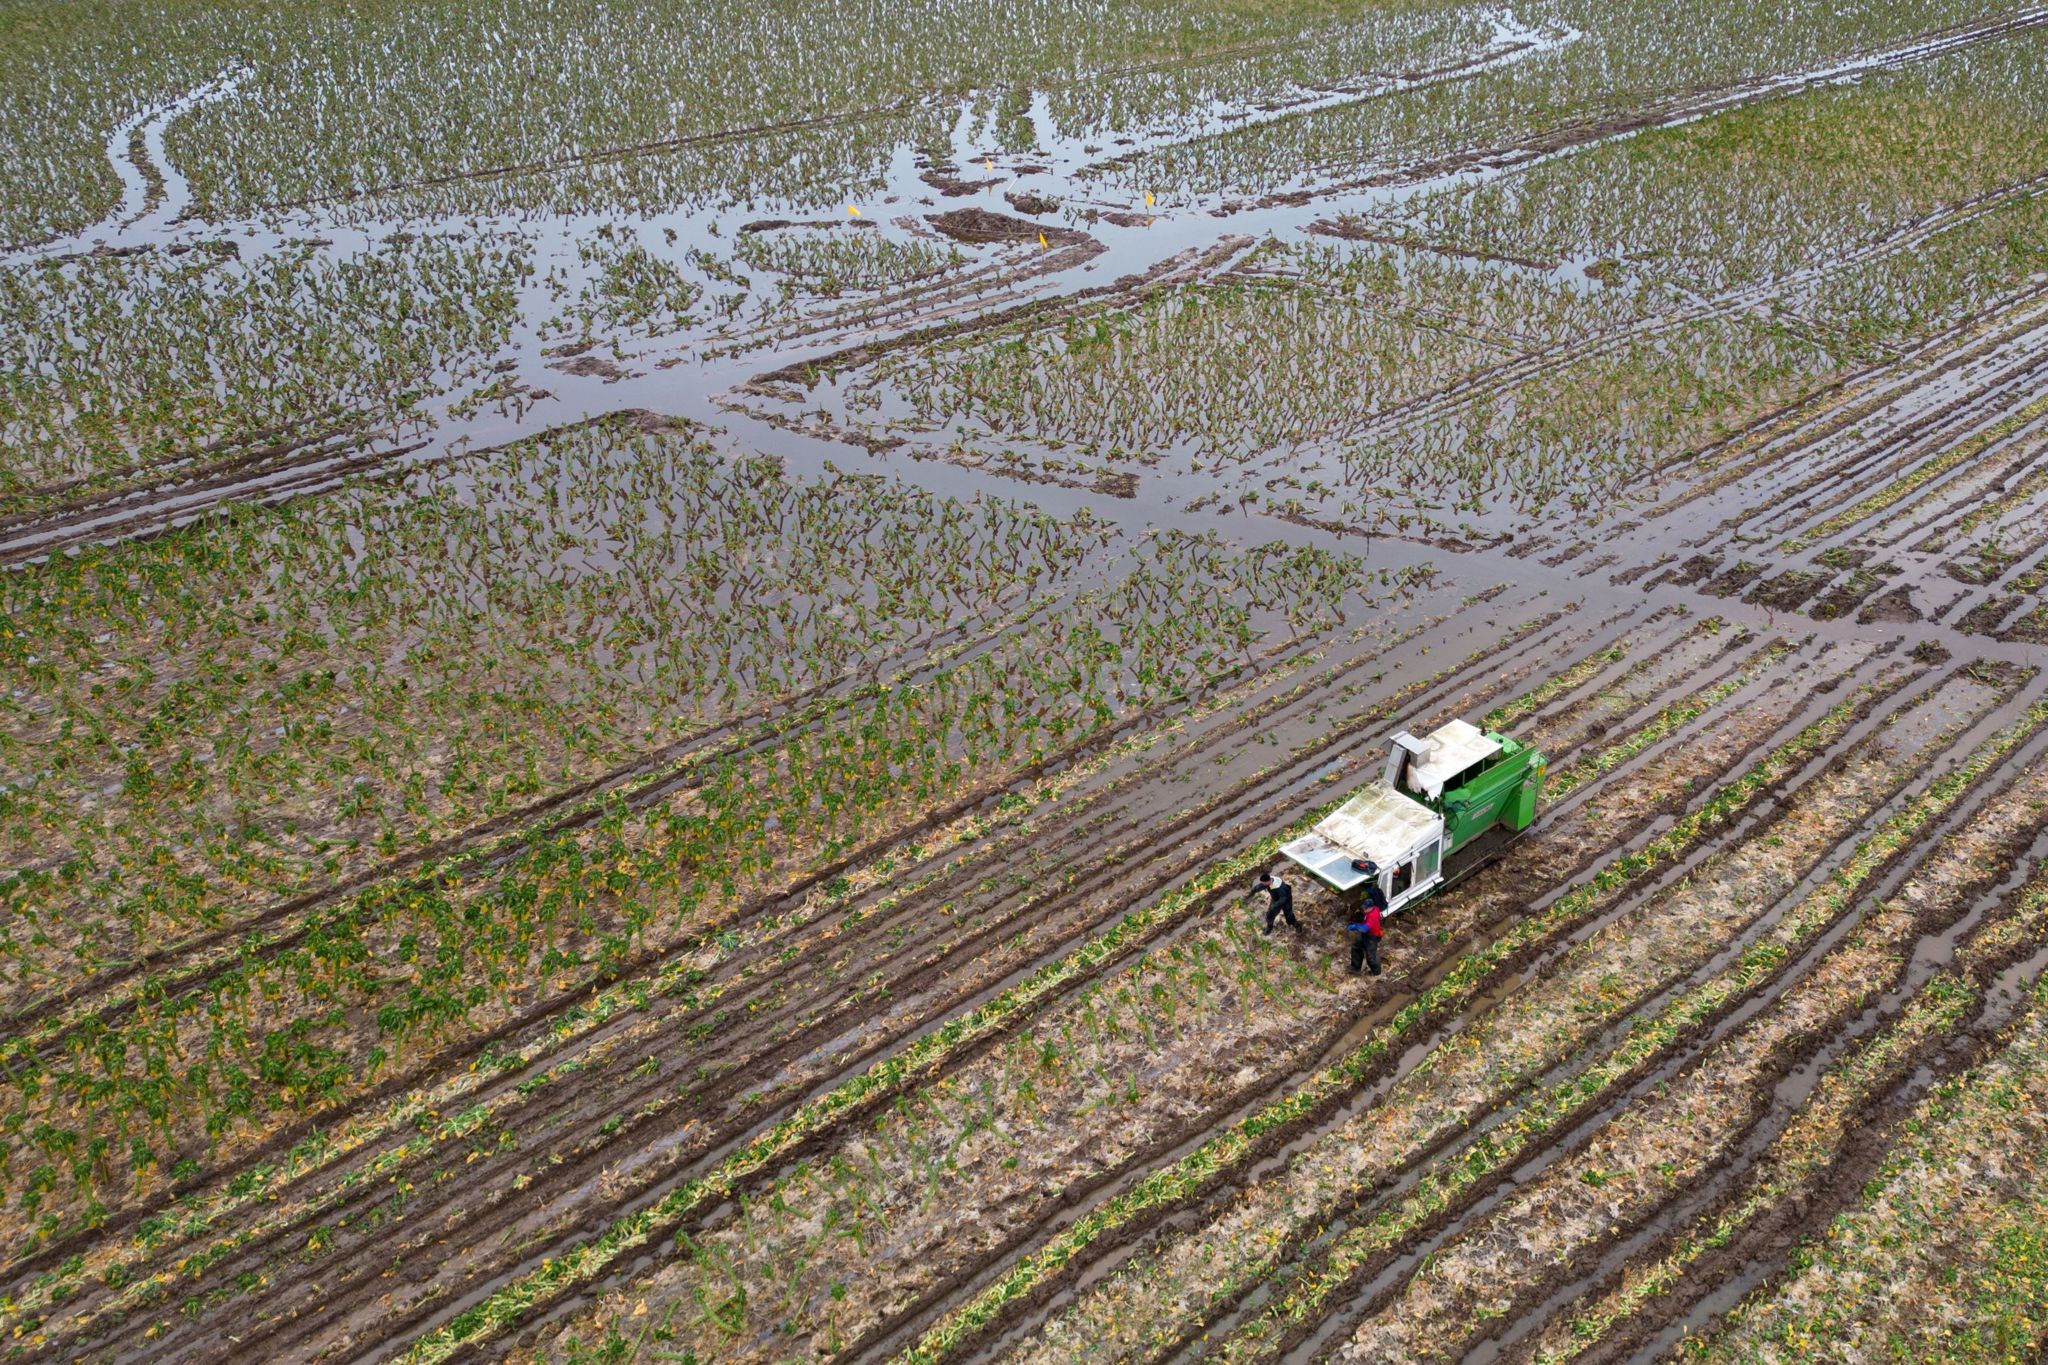 Farm workers harvest brussel sprouts on flooded field